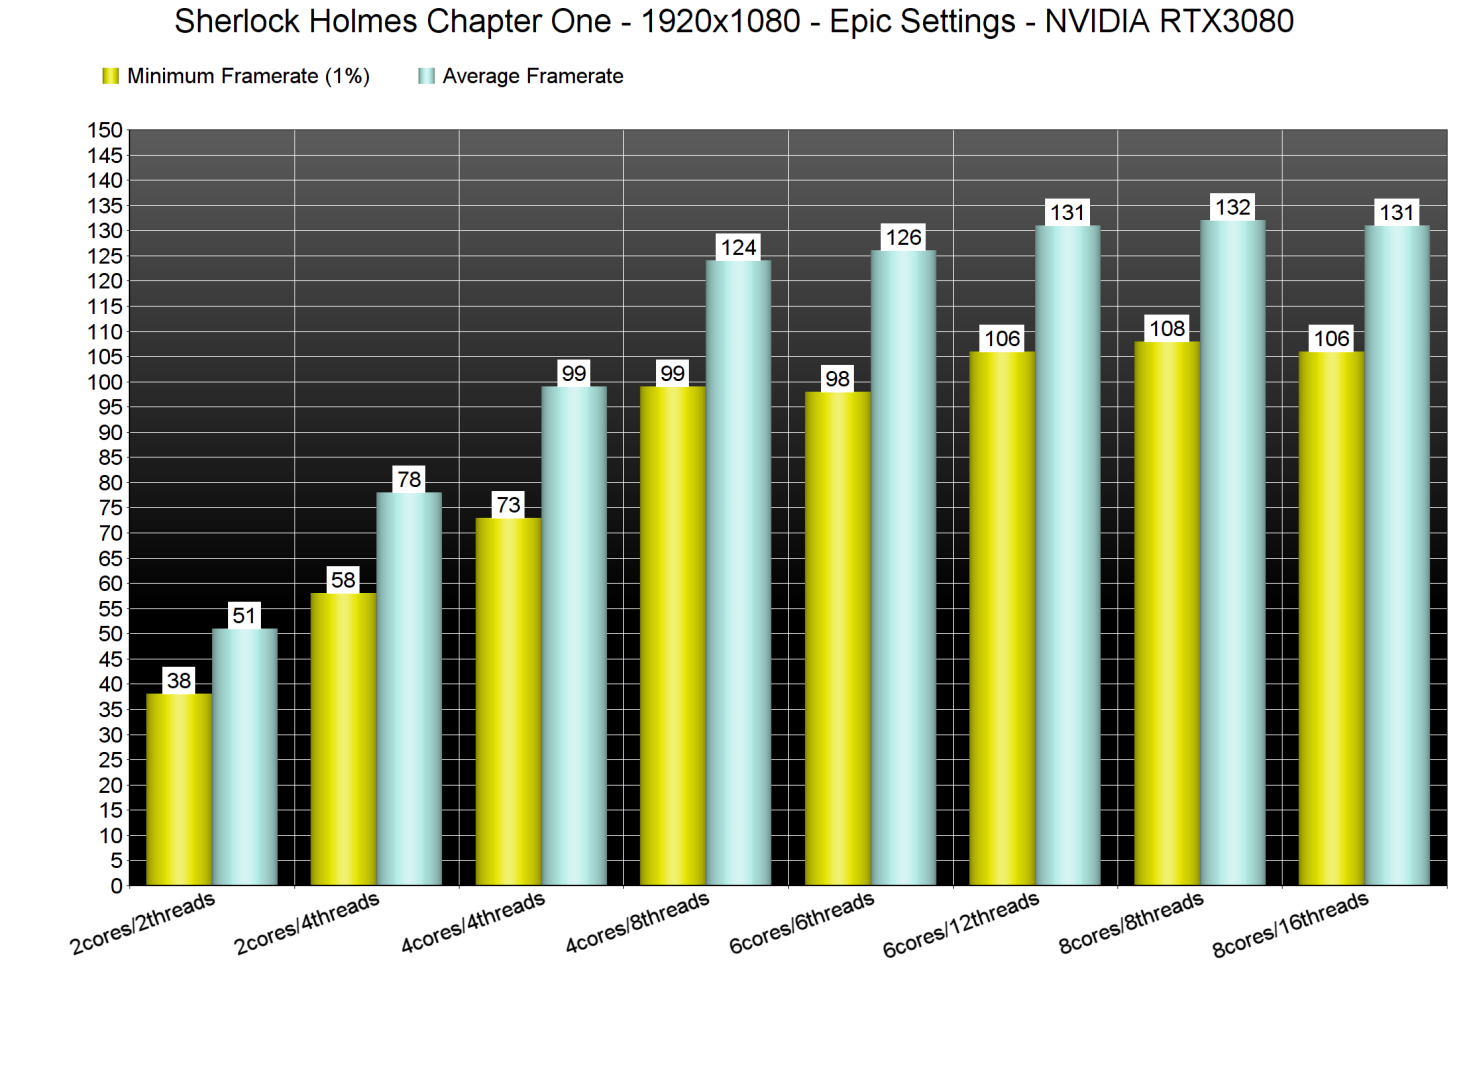 Sherlock Holmes Chapter One CPU benchmarks